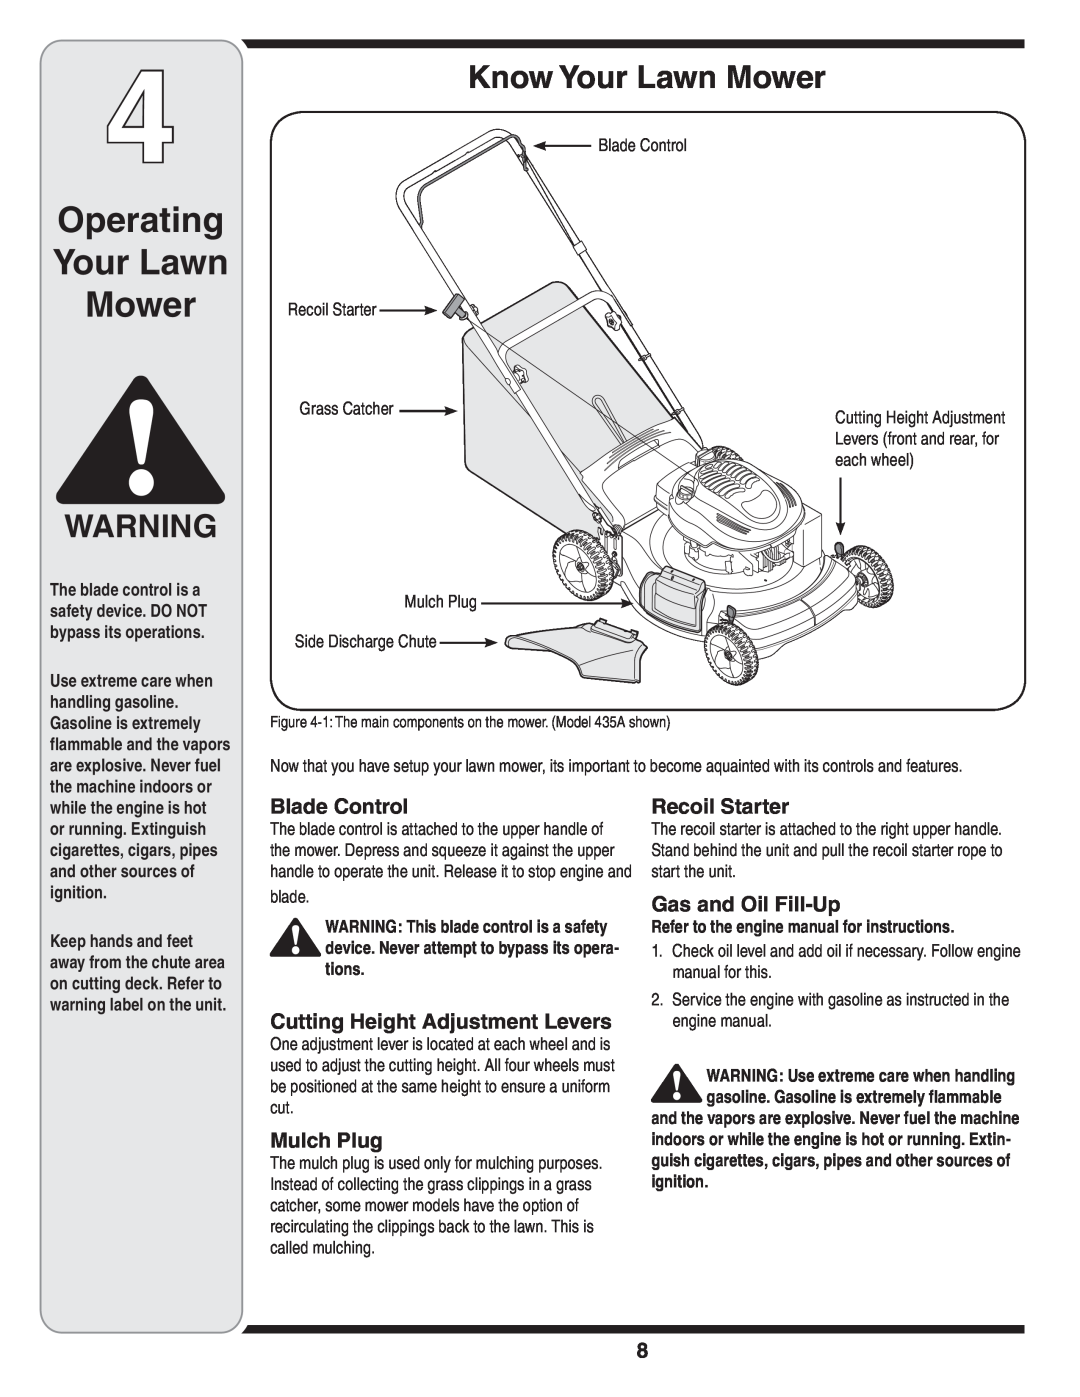 MTD Series 430 warranty Operating Your Lawn Mower, Know Your Lawn Mower, Refer to the engine manual for instructions 